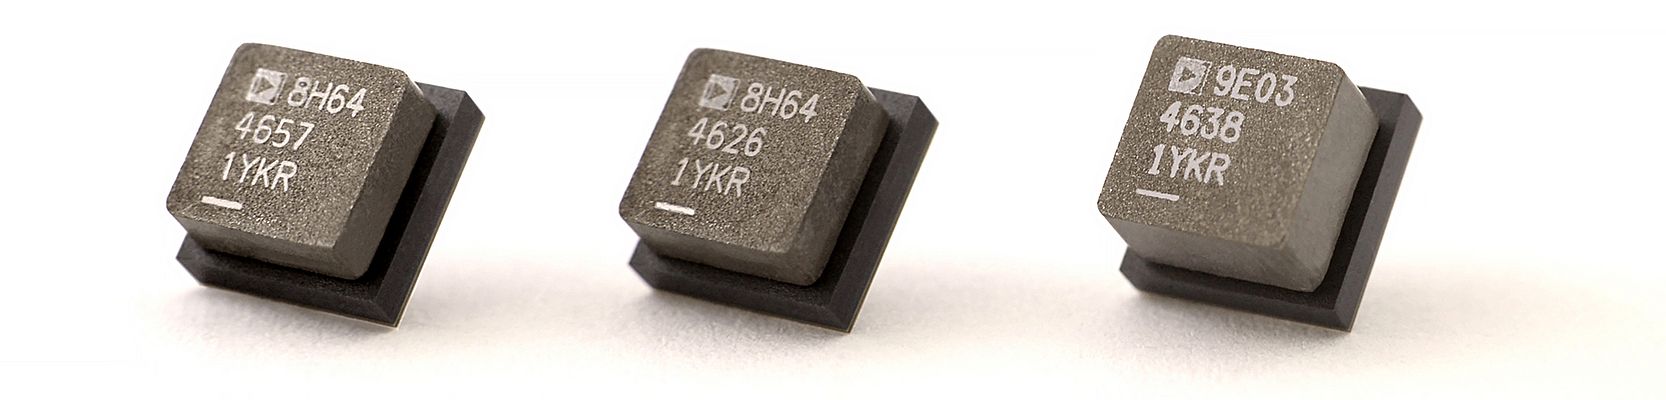 Figure 1. LTM4657, LTM4626, and LTM4638 offer different output current ratings using the same pinout. The LTM4657 and LTM4626 use lower profile inductors to reduce the overall height.